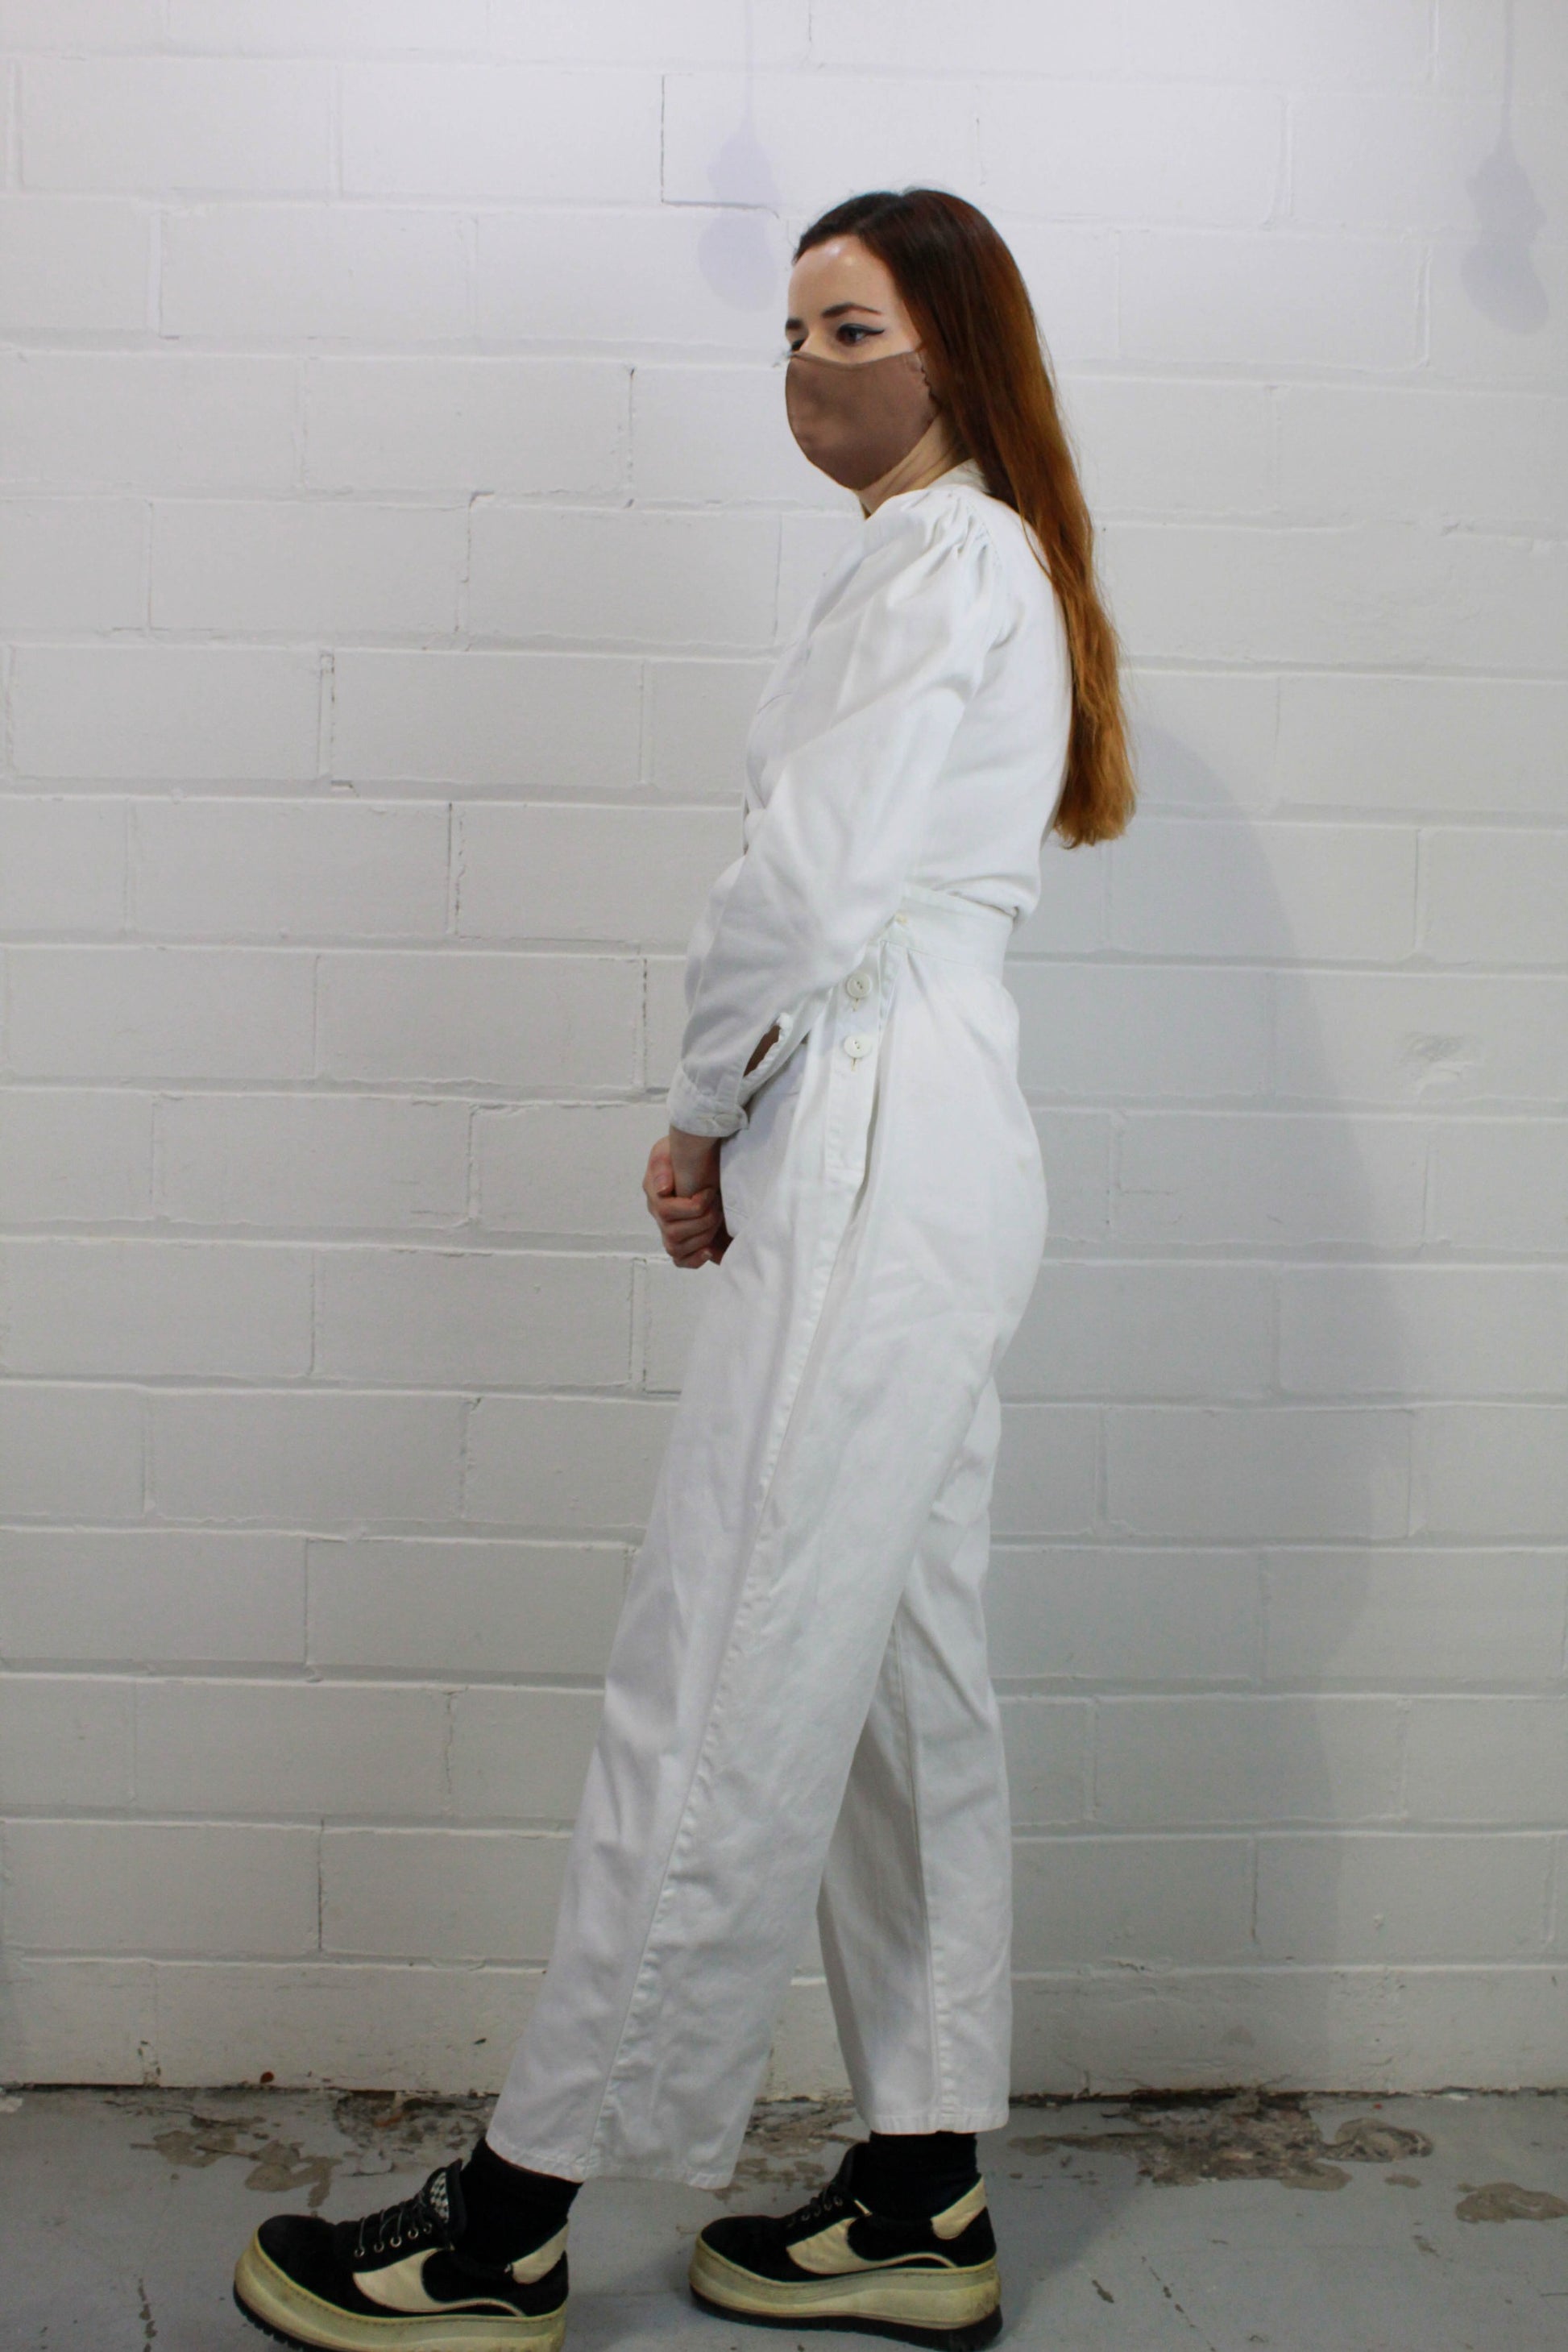 Ian Drummond Vintage Reproduction WWII White Women's Jumpsuit/Coveralls, Small and XL Available XL